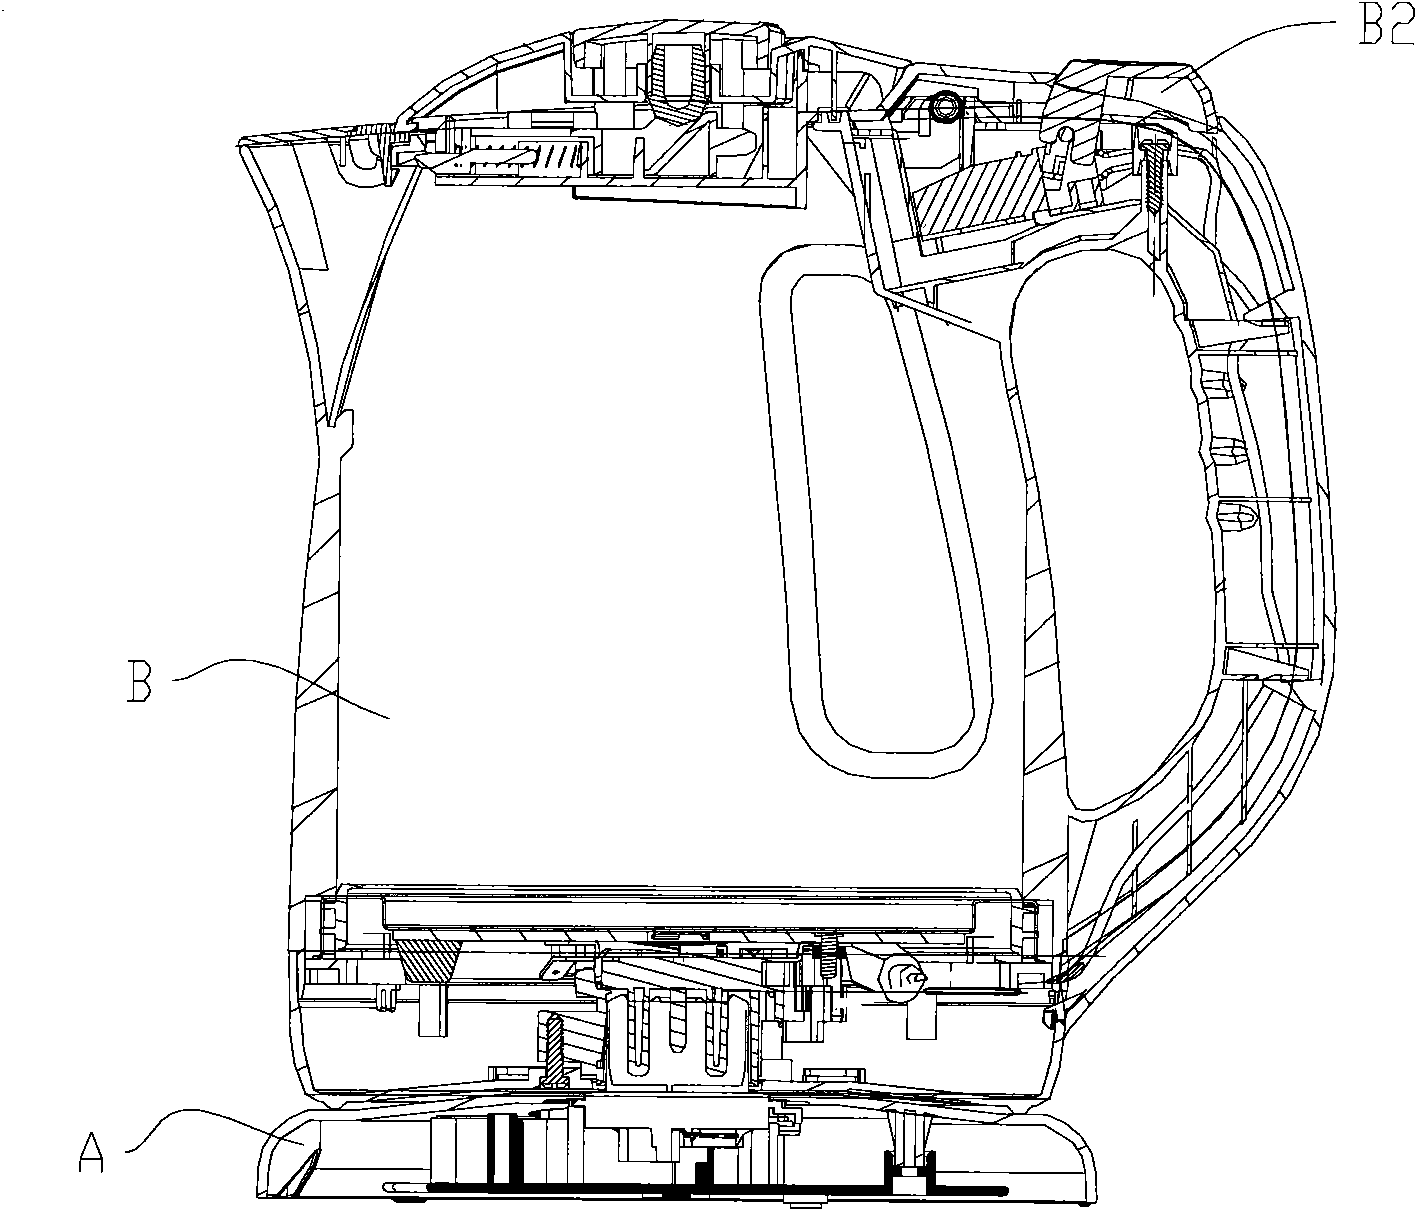 Electric connection device of base and main body